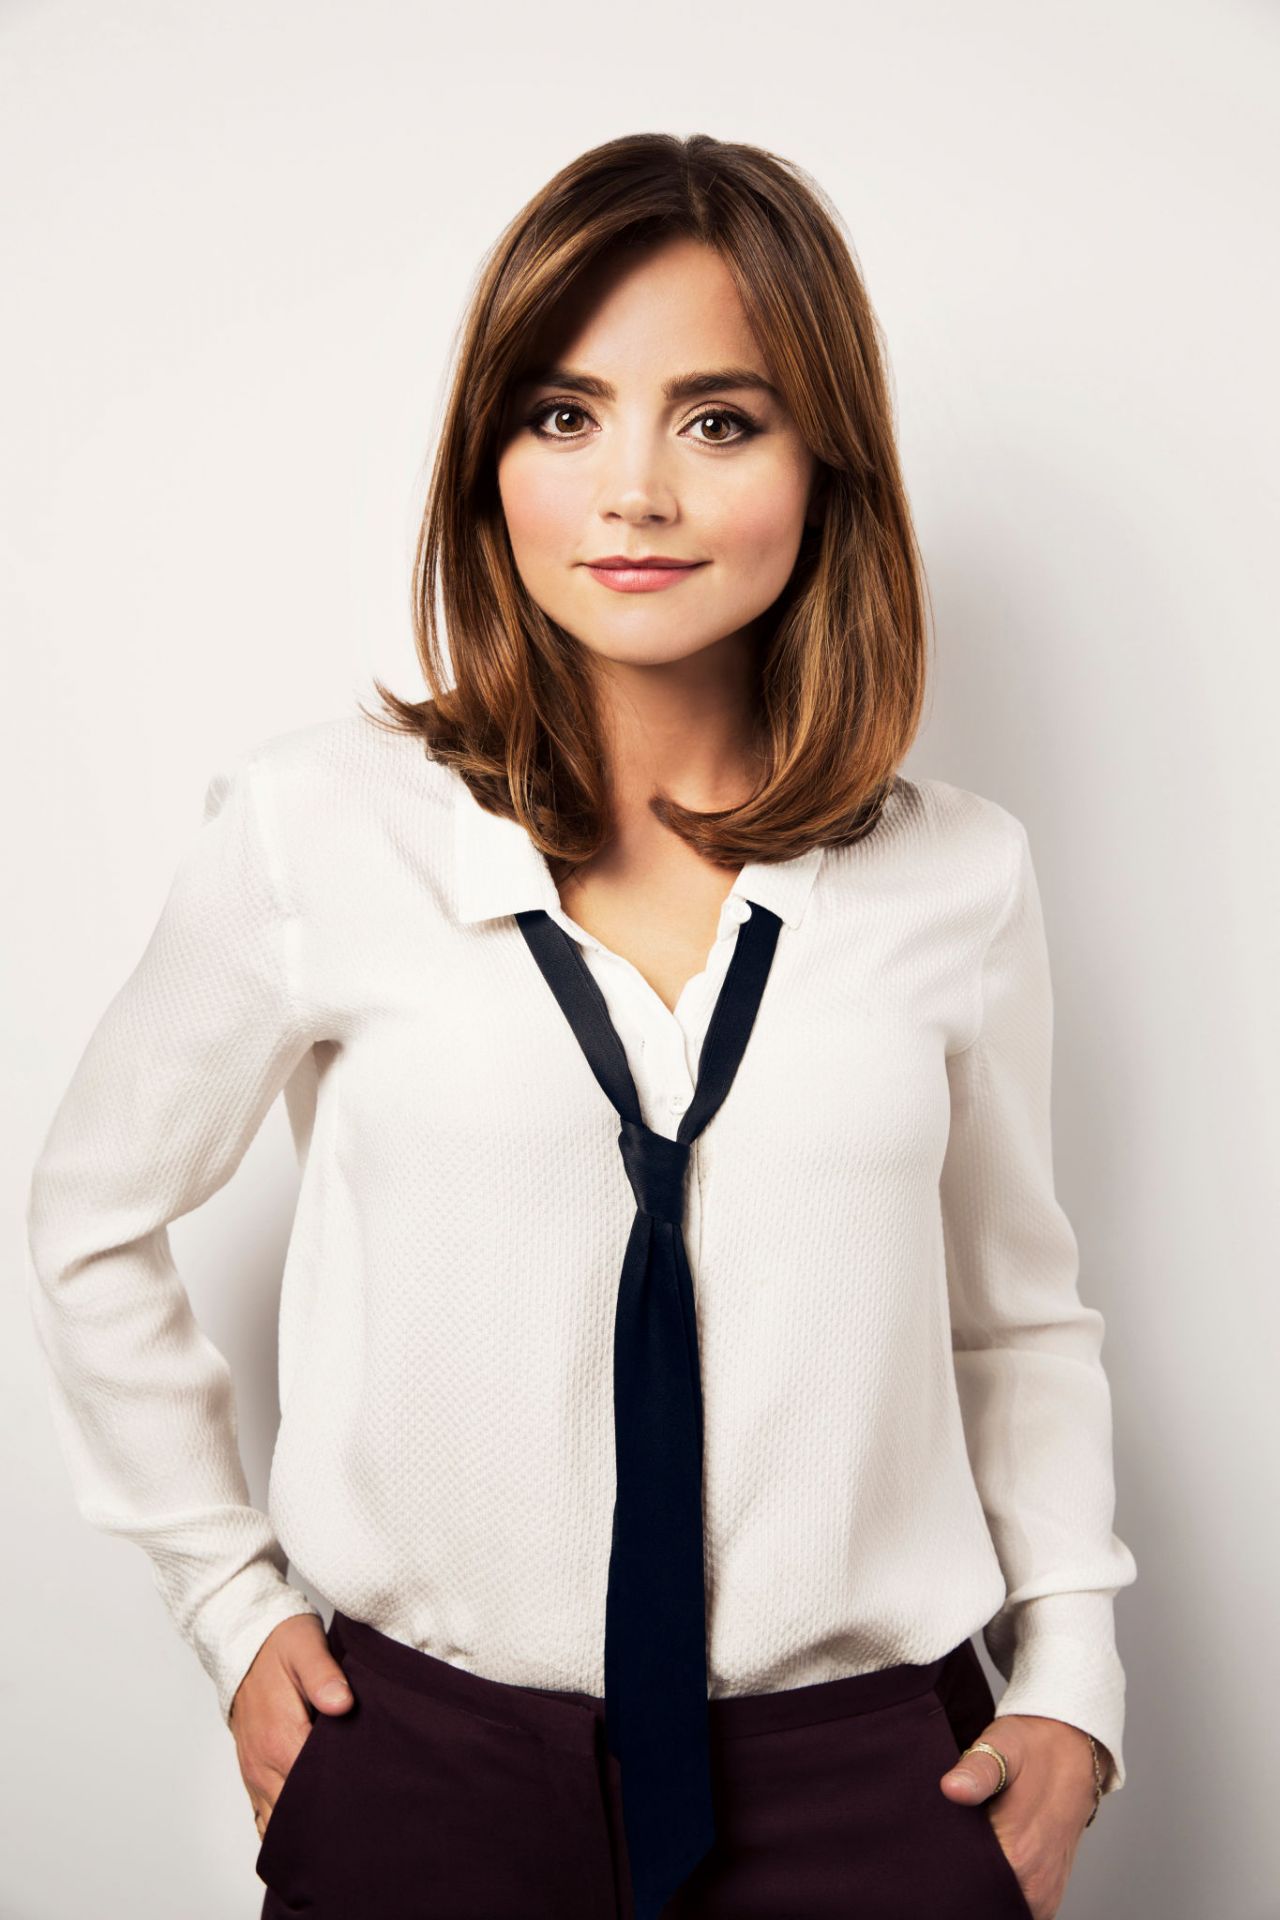 Amazing Jenna Coleman Pictures & Backgrounds